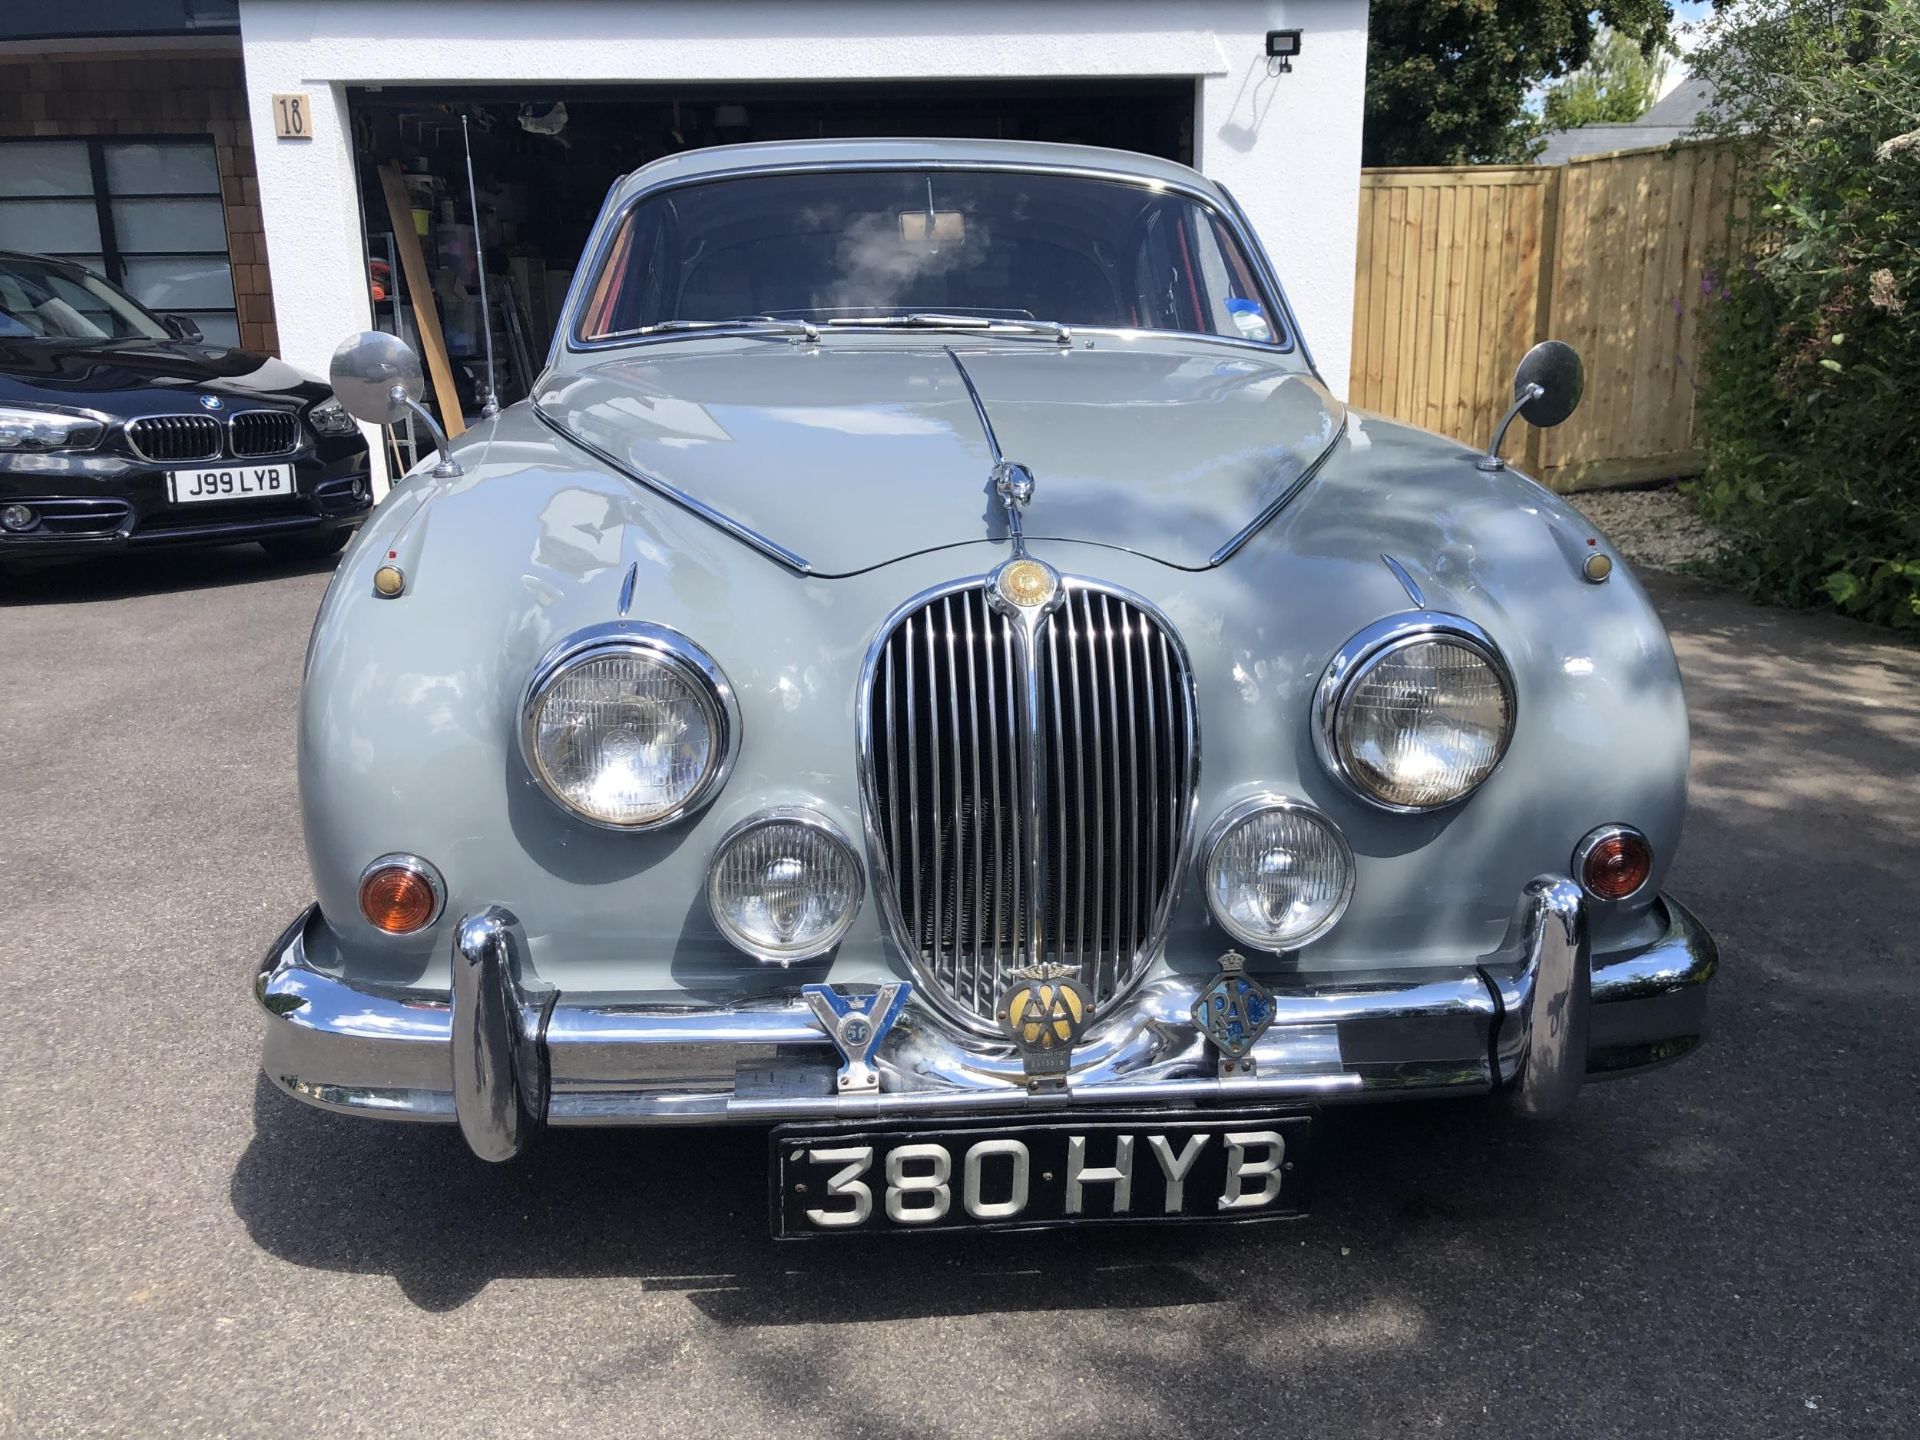 1960 Jaguar MKII 3.4 auto Registration number 380 HYB Chassis number 151126B/W Engine number - Image 2 of 100